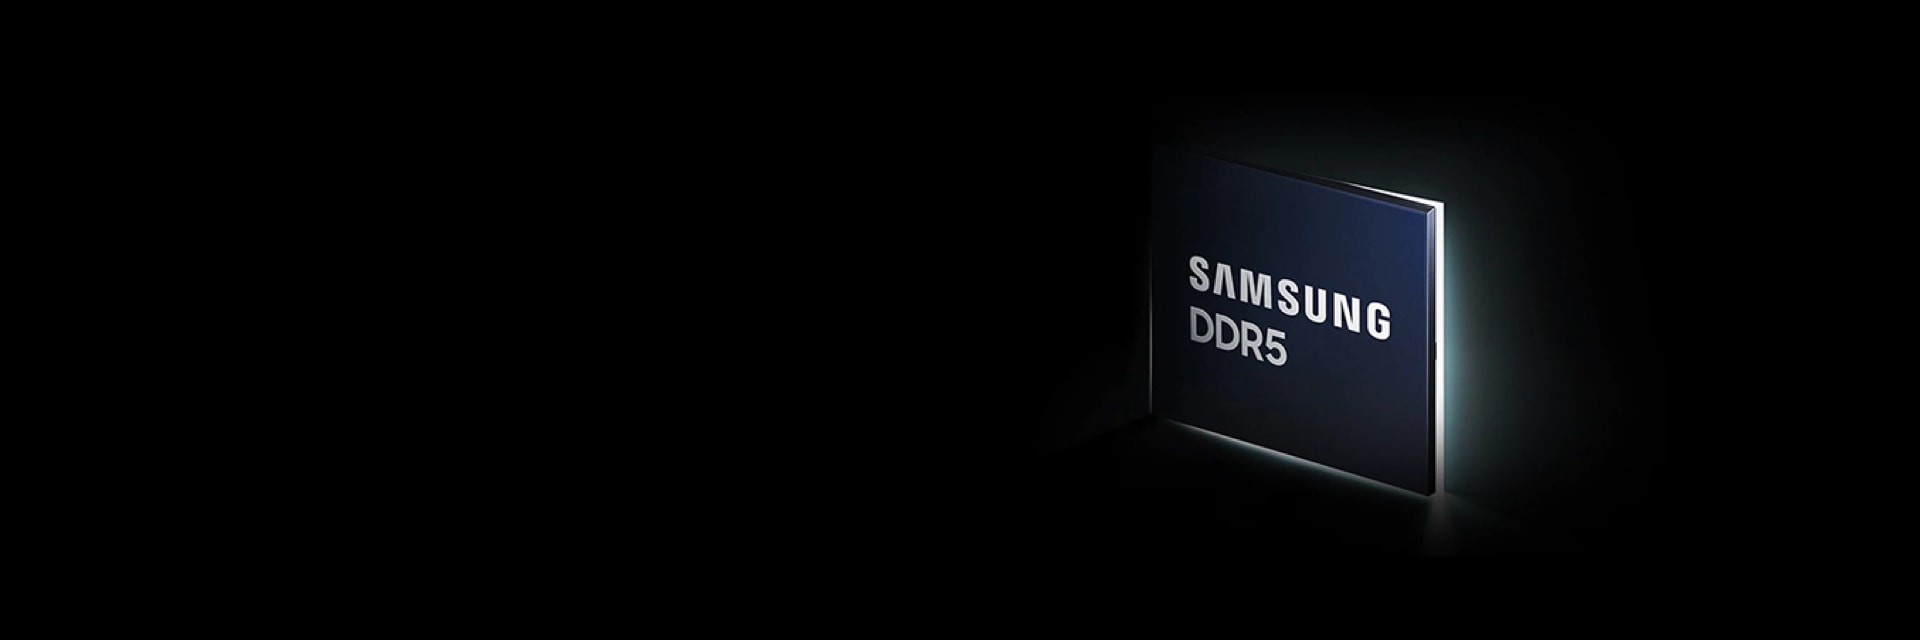 DDR5 product from Samsung Semiconductor's DRAM line